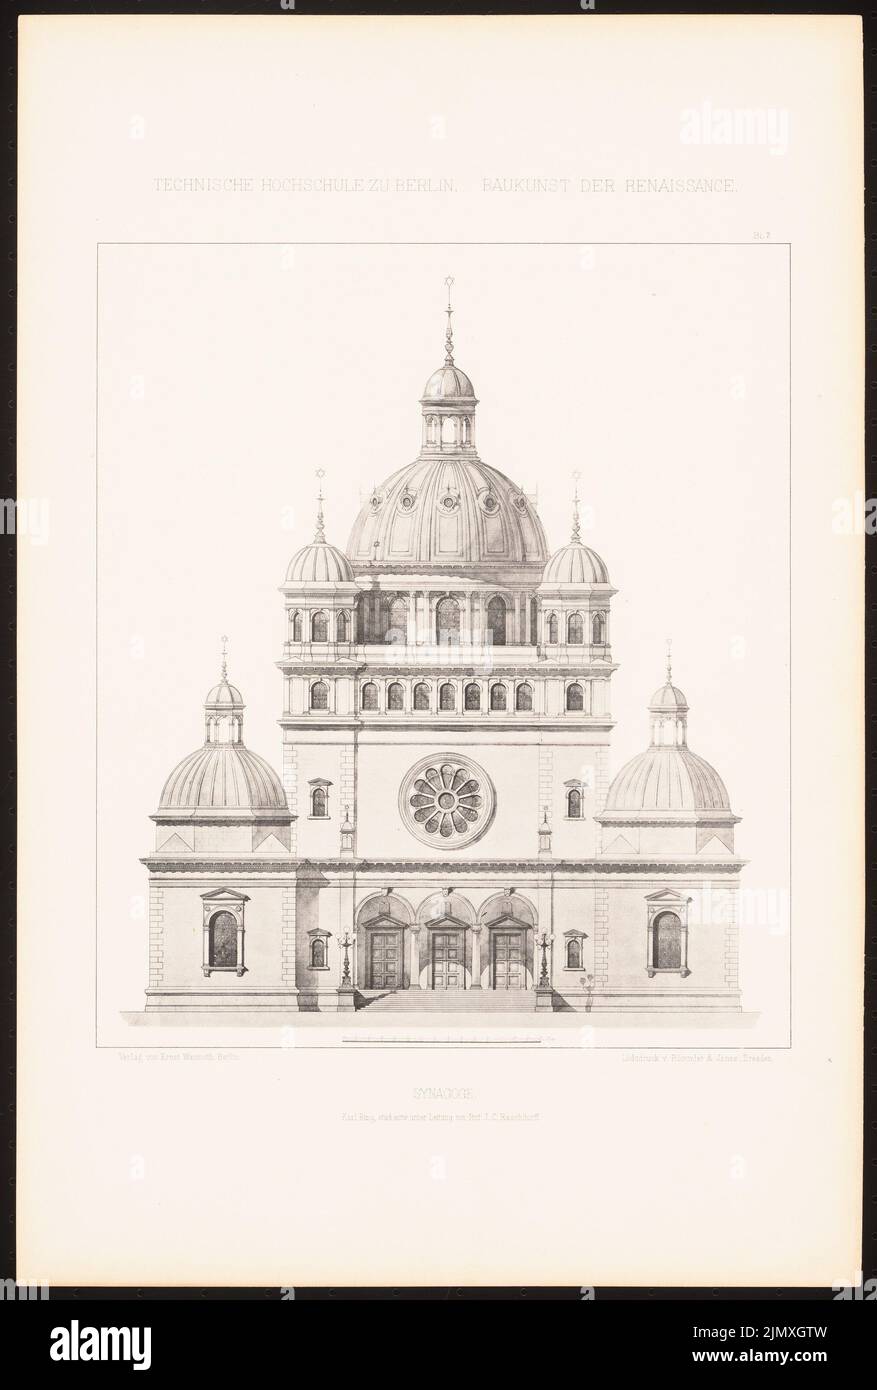 Bing Karl, synagogue. (From: J.C. Raschdorff, architecture of the Renaissance, 1880.) (1880-1880): View. Light pressure on paper, 49.1 x 33.2 cm (including scan edges) Bing Karl : Synagoge. (Aus: J.C. Raschdorff, Baukunst der Renaissance, 1880) Stock Photo